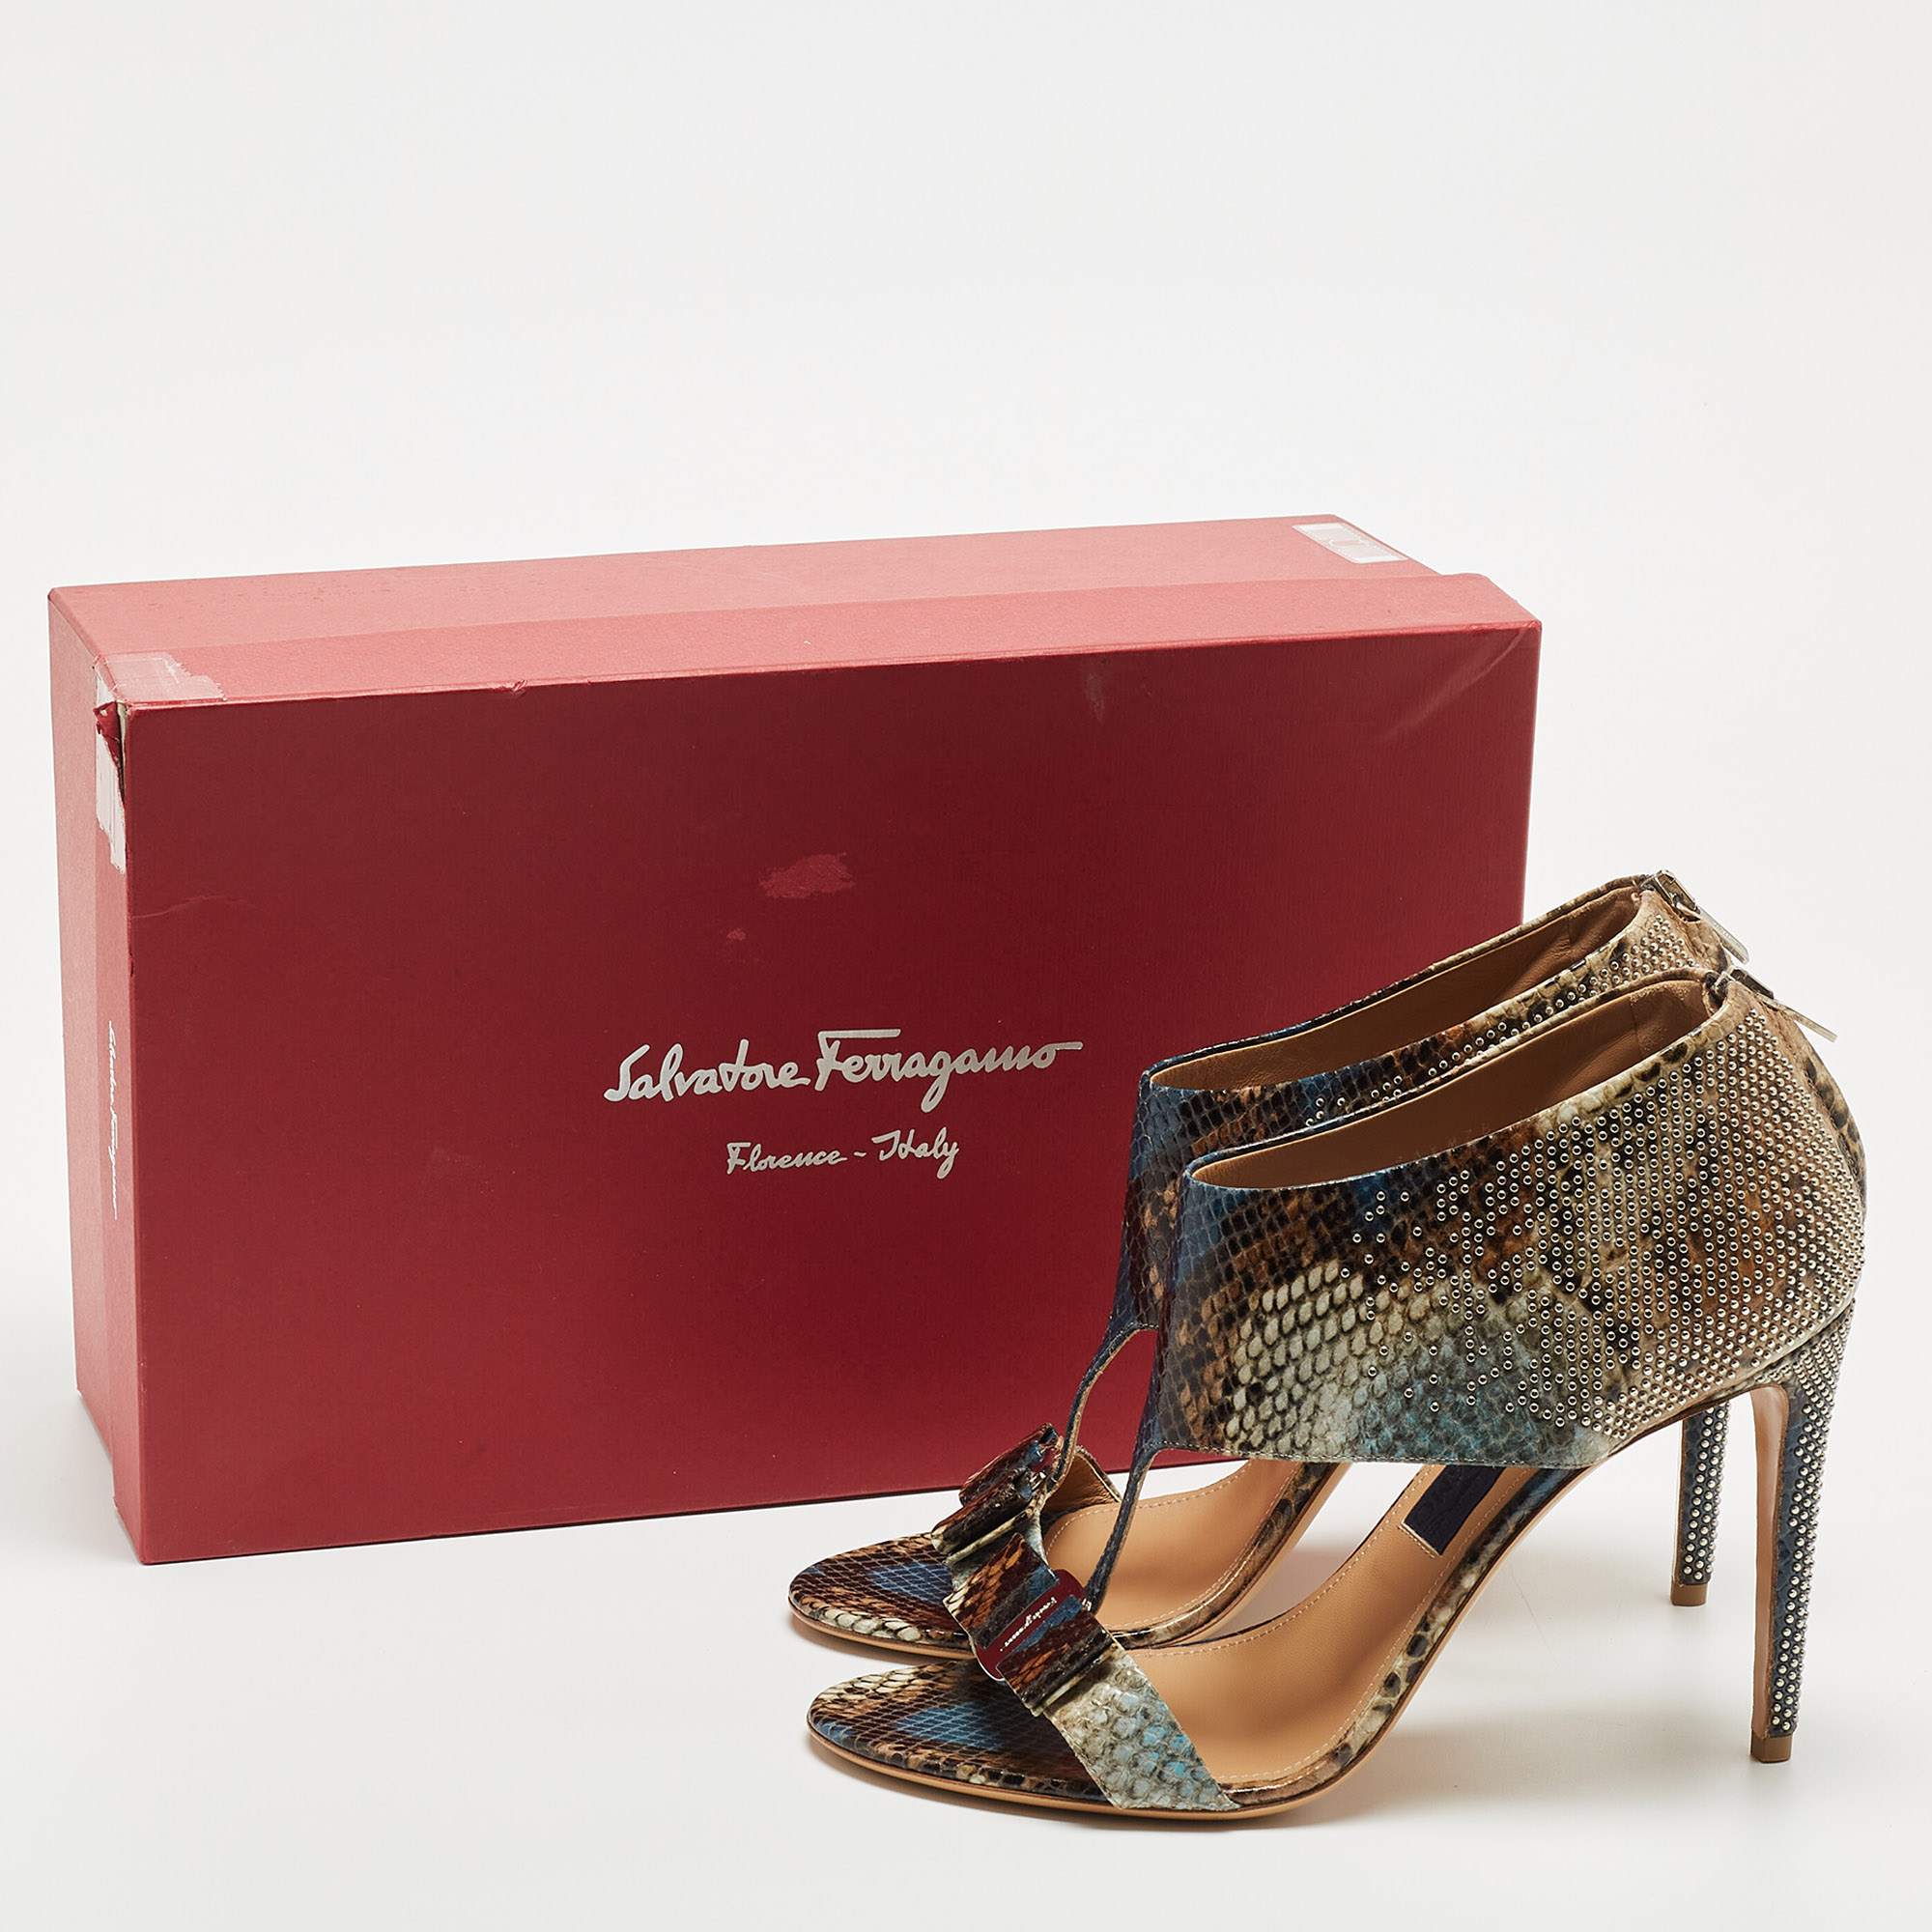 Salvatore Ferragamo Brown/Blue Python Embossed Leather Ankle Strap Sandals Size 40.5